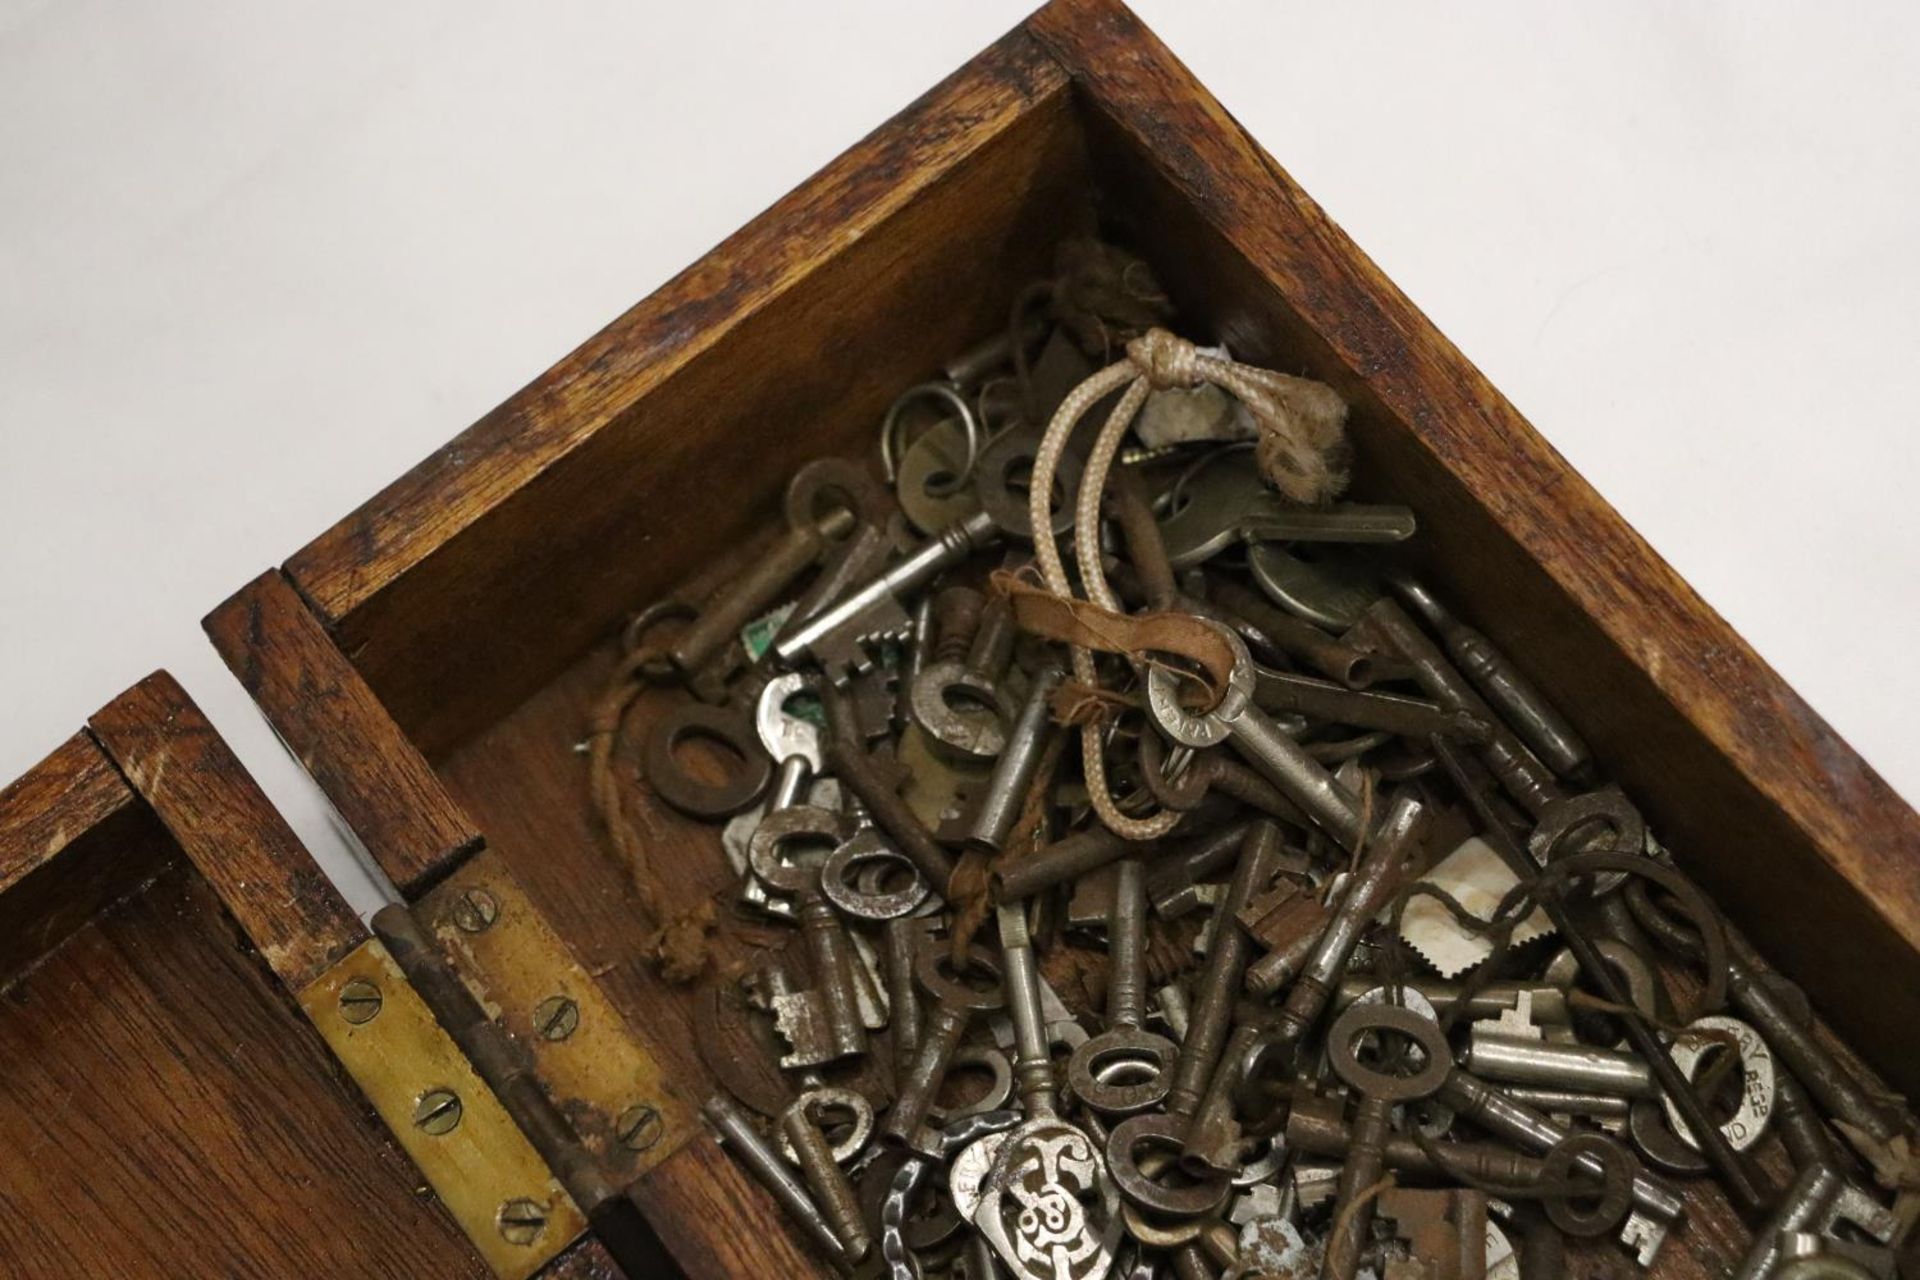 A COLLECTION BOX CONTAINING CIRCA 1900 FURNITURE KEYS - Image 6 of 6